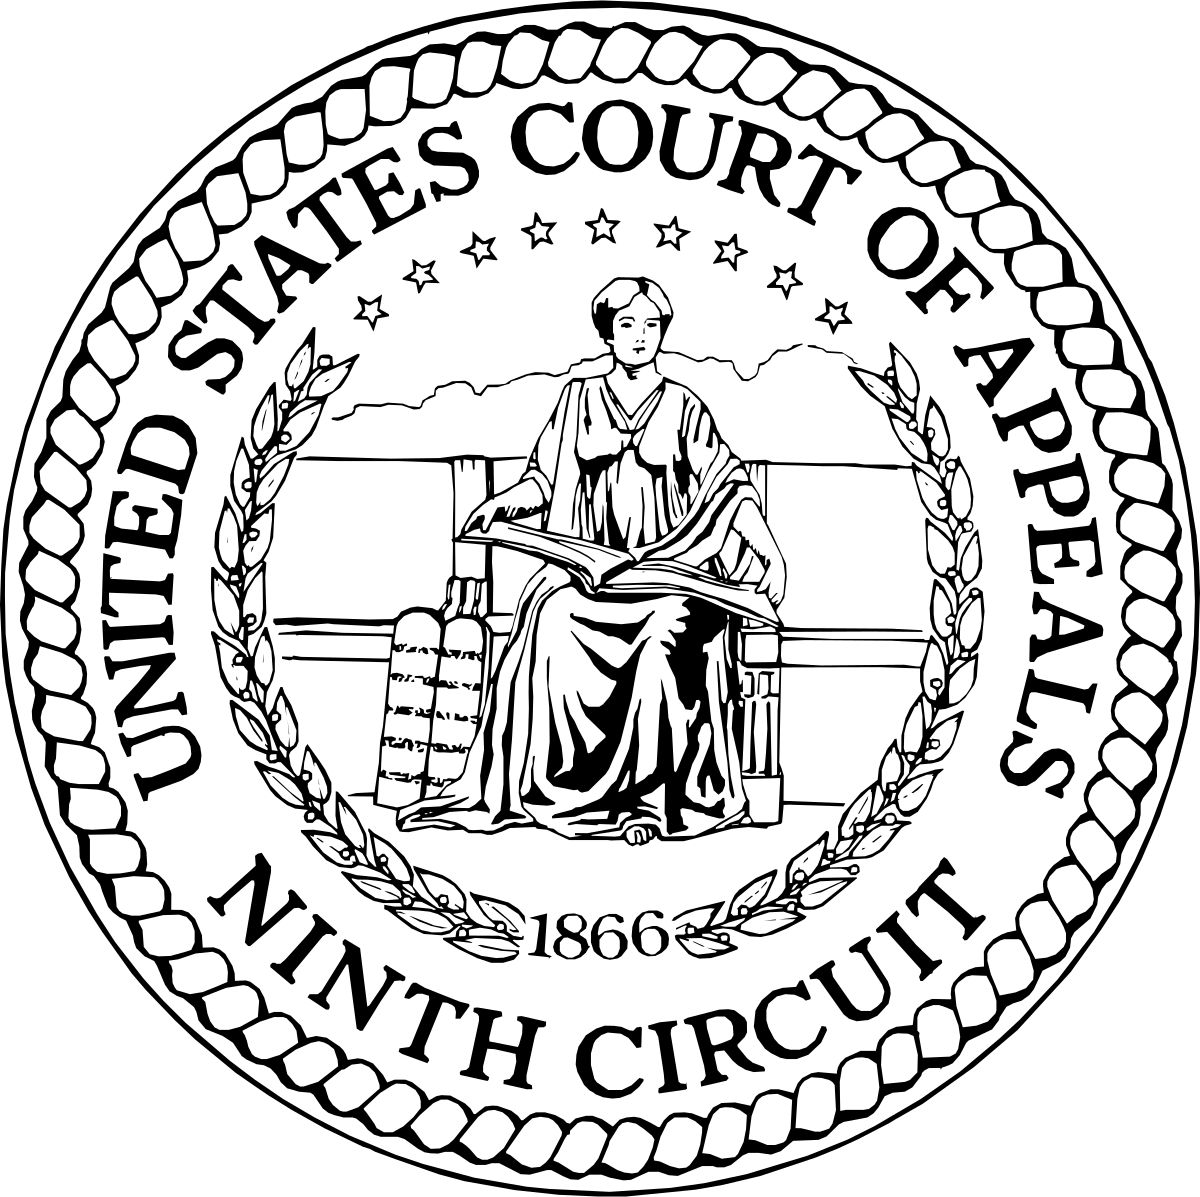 Court of Appeals Ninth Circuit